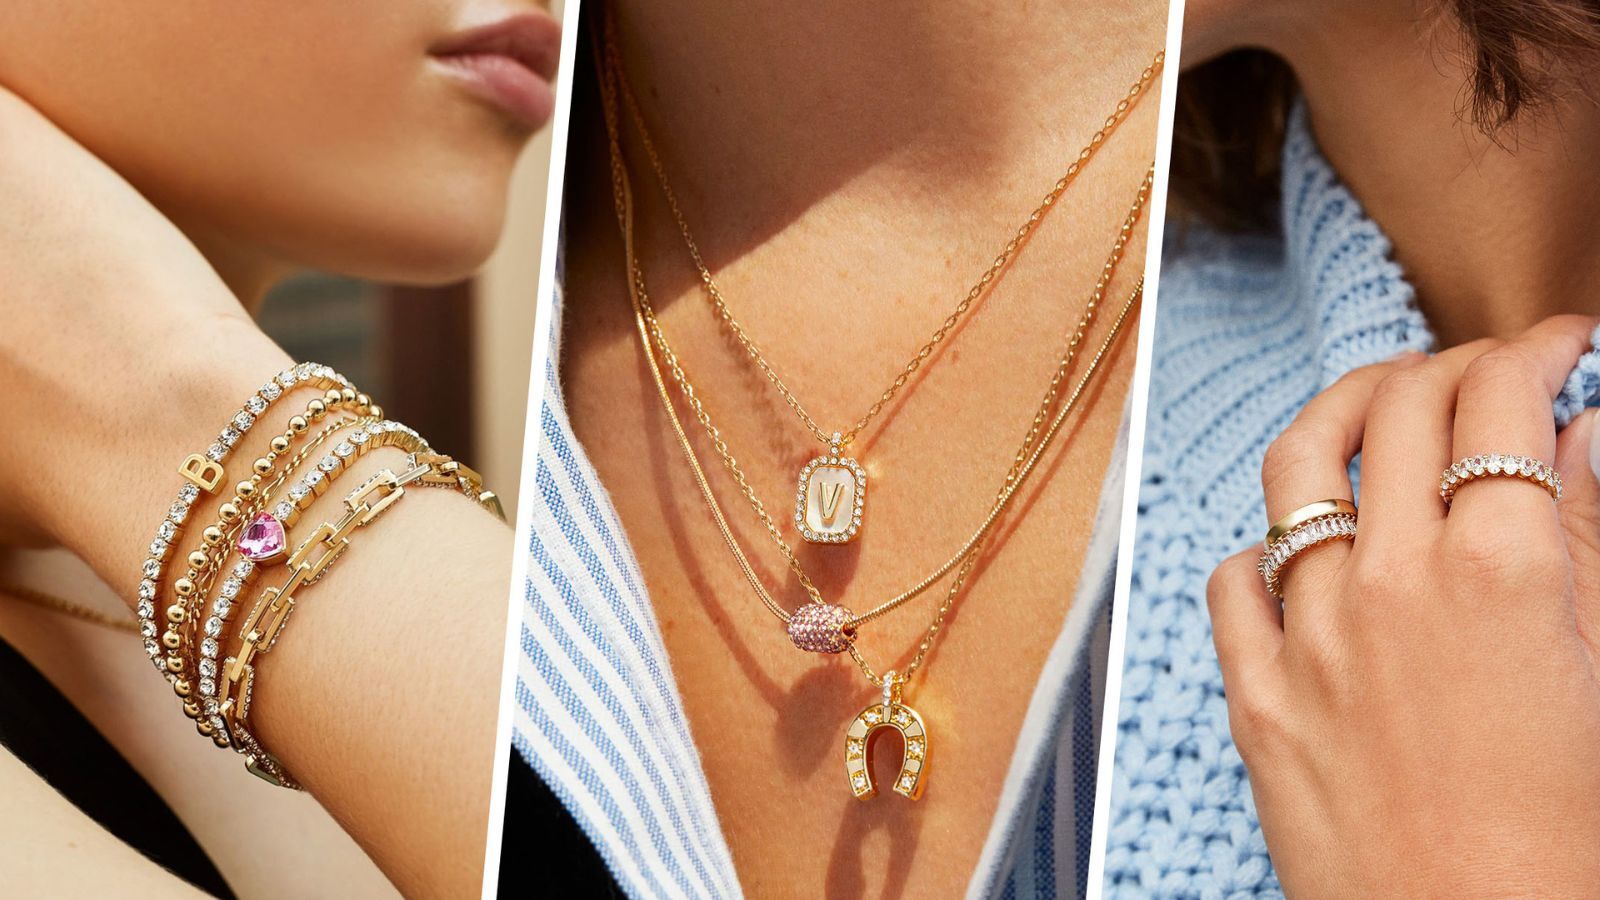 BaubleBar Jewelry Review: Is It Really the Go-To Affordable Jewelry Brand?